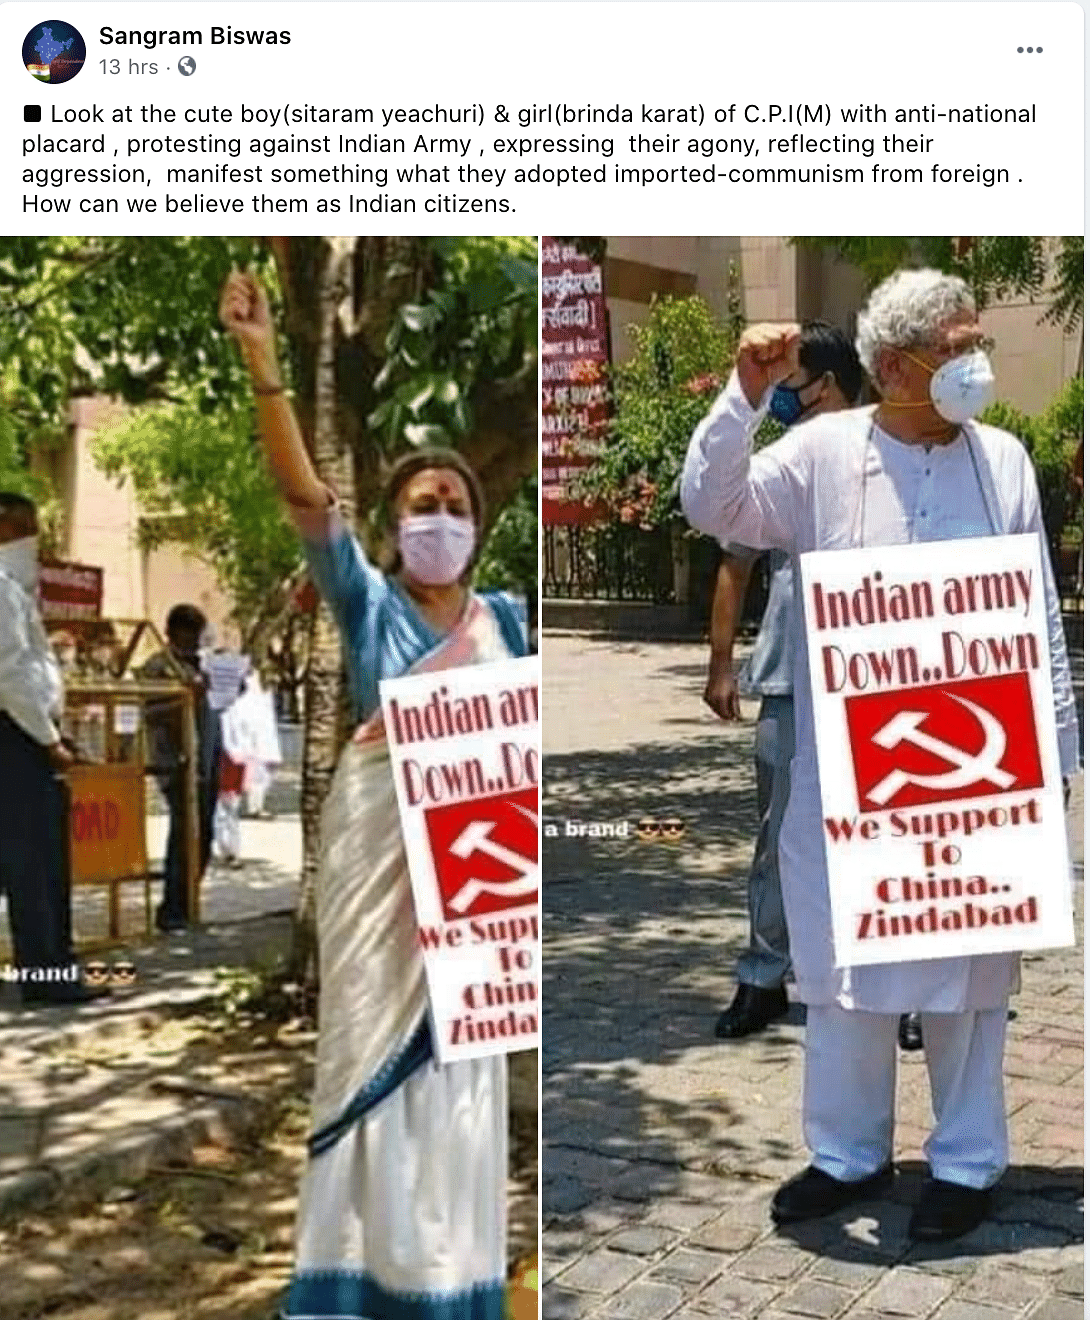 The original images prove that the photos are from the protest that the party had organised across India on 16 June.